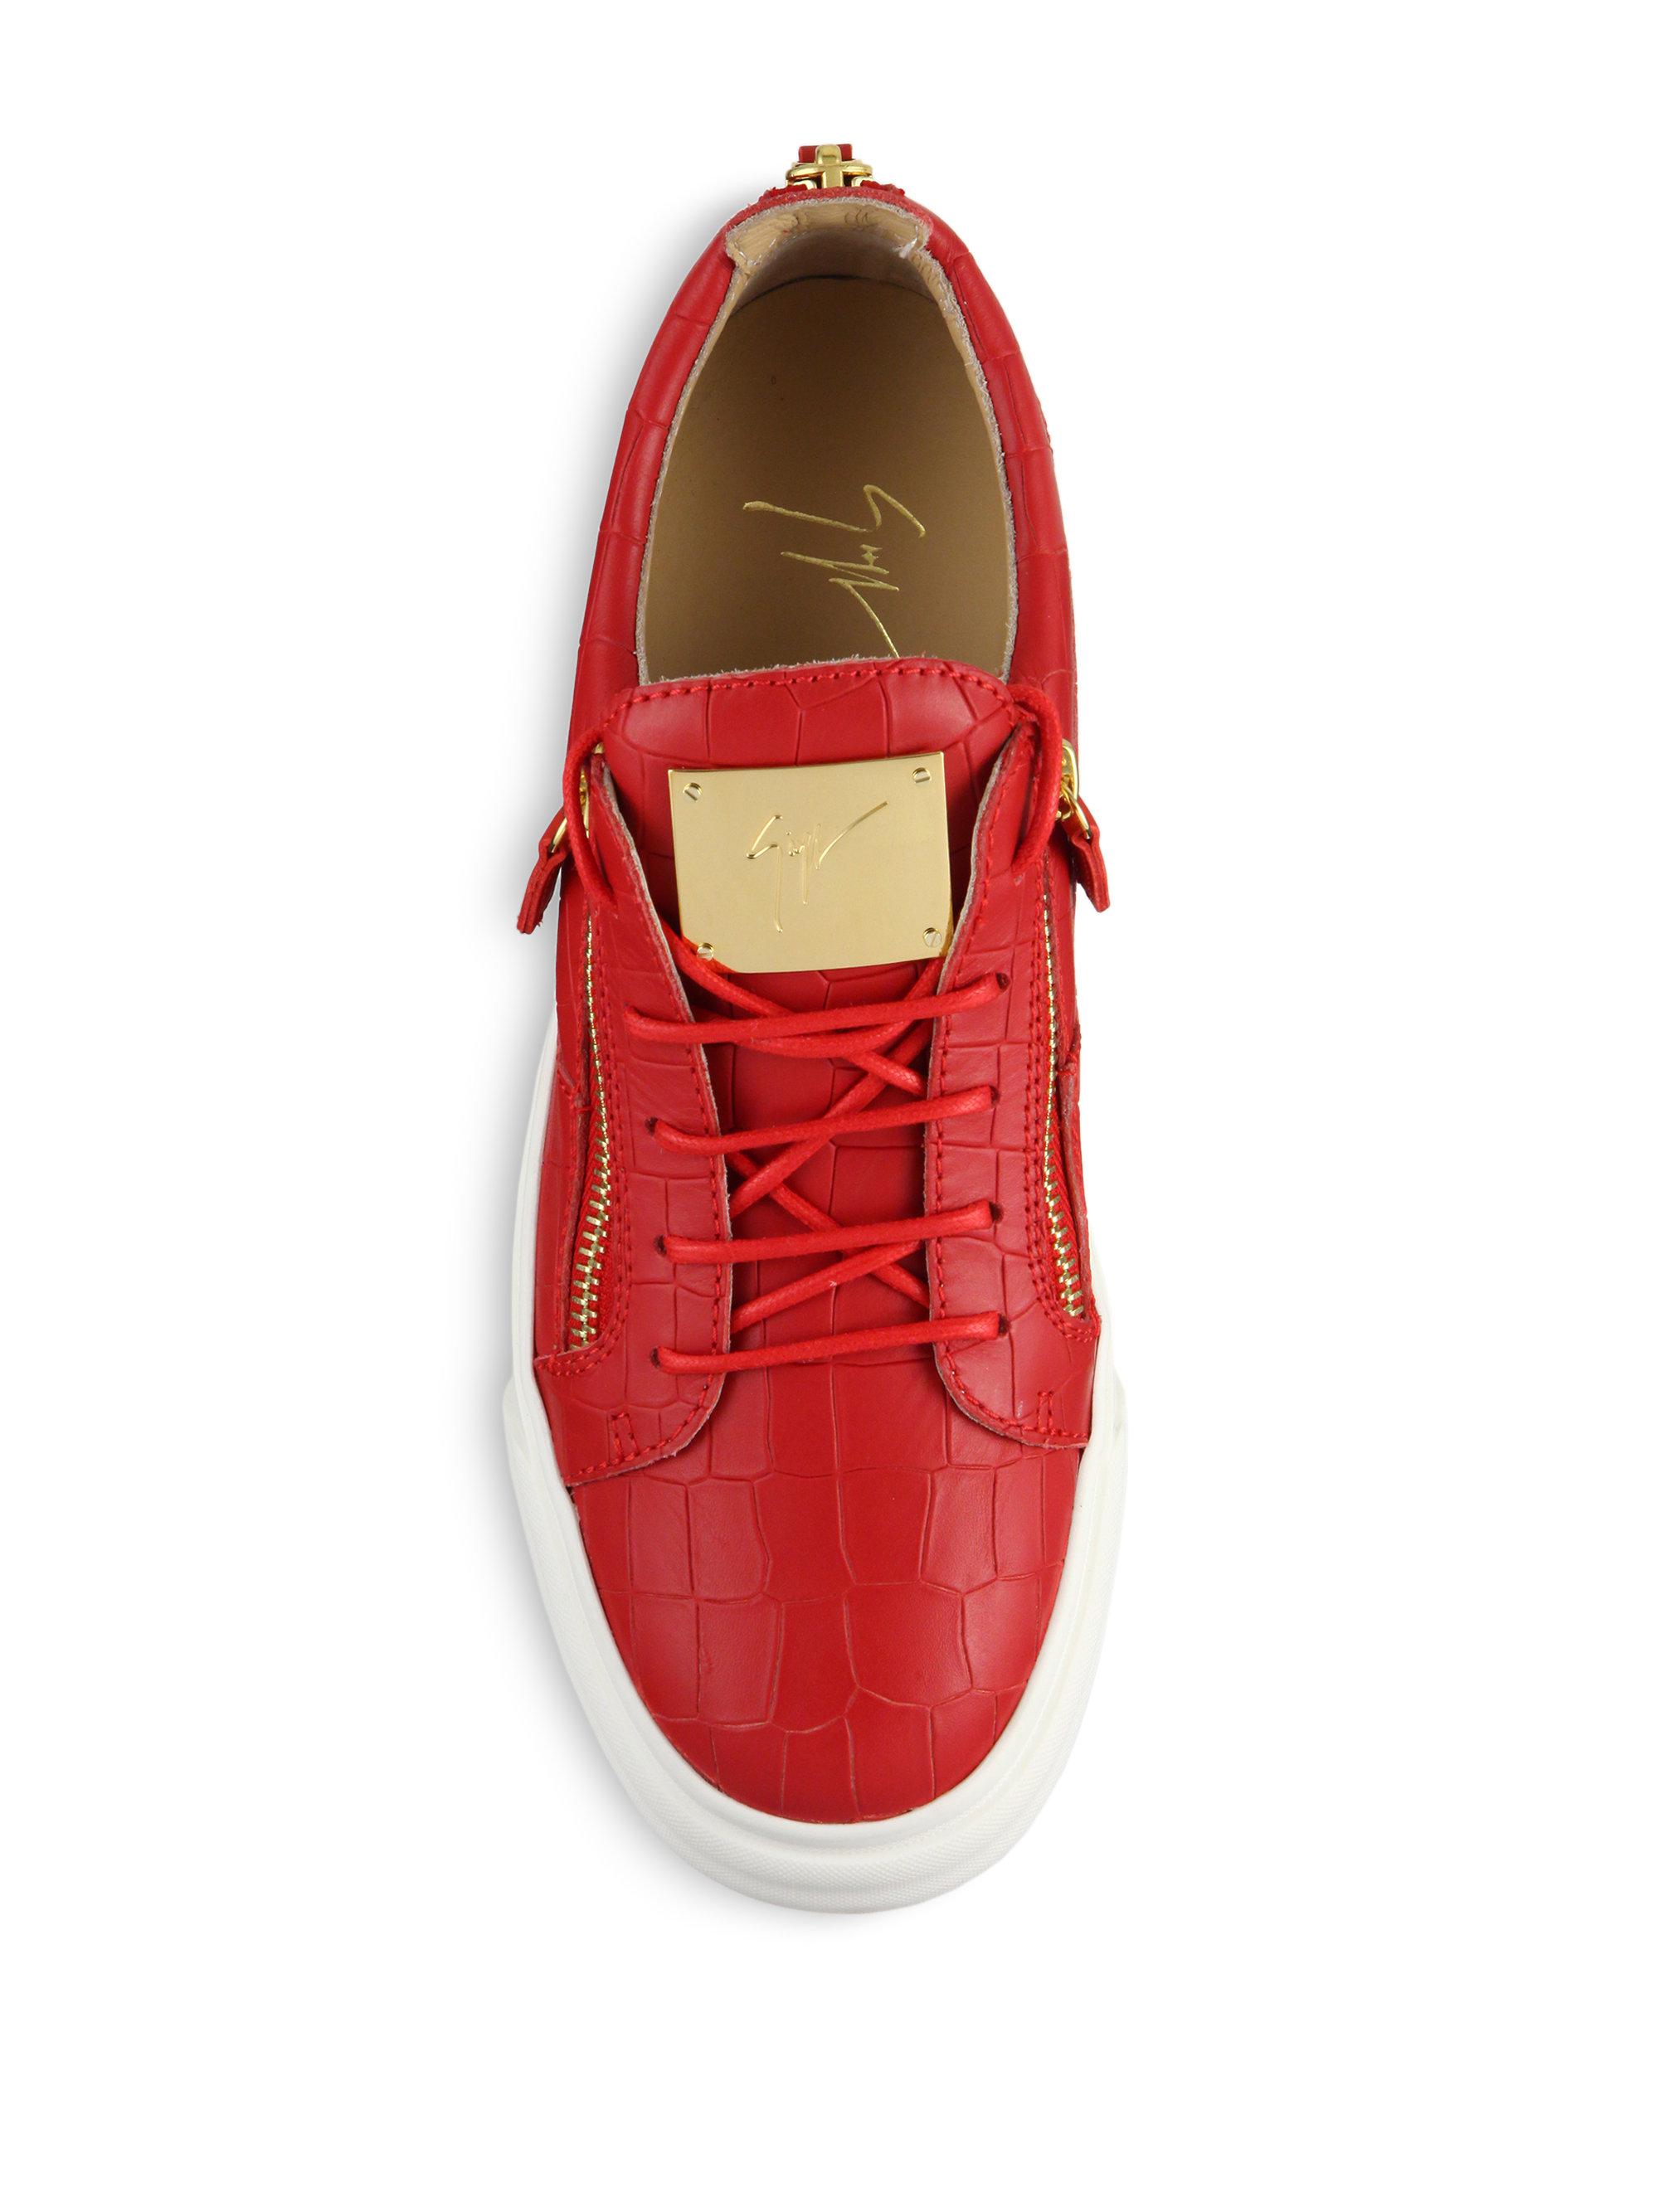 Giuseppe Zanotti Croc-embossed Leather Double-zip Low-top Sneakers in Red  for Men - Lyst